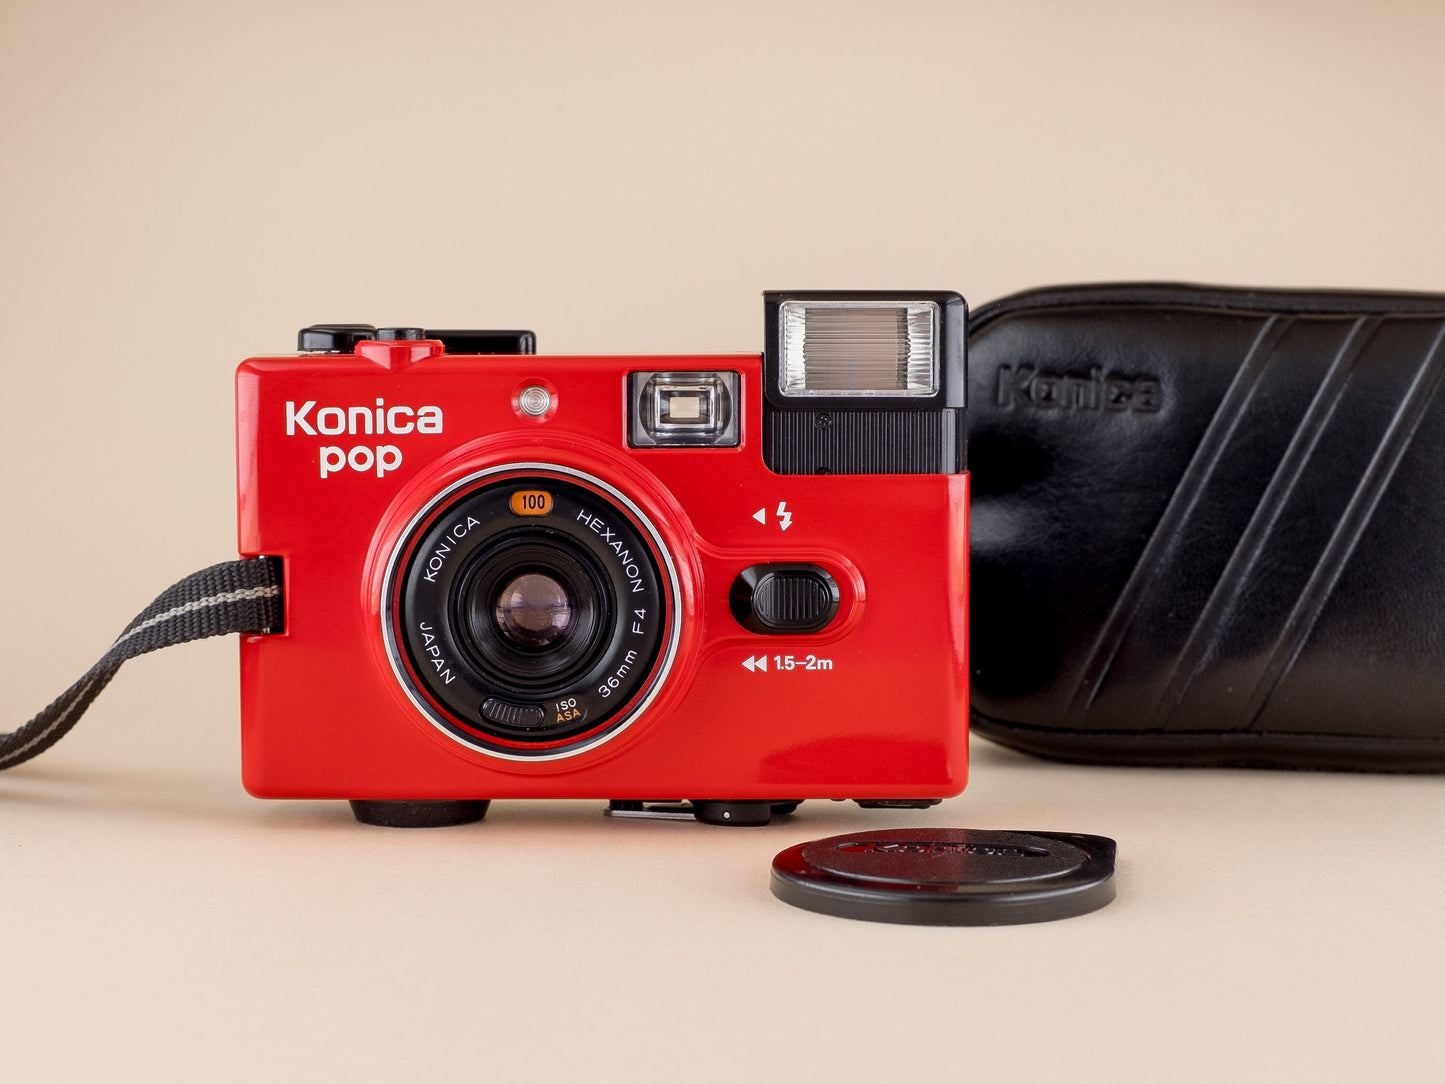 Konica POP | Vintage 1980's Analogue Film Camera | The Perfect Party Camera | With Original Packaging and Case